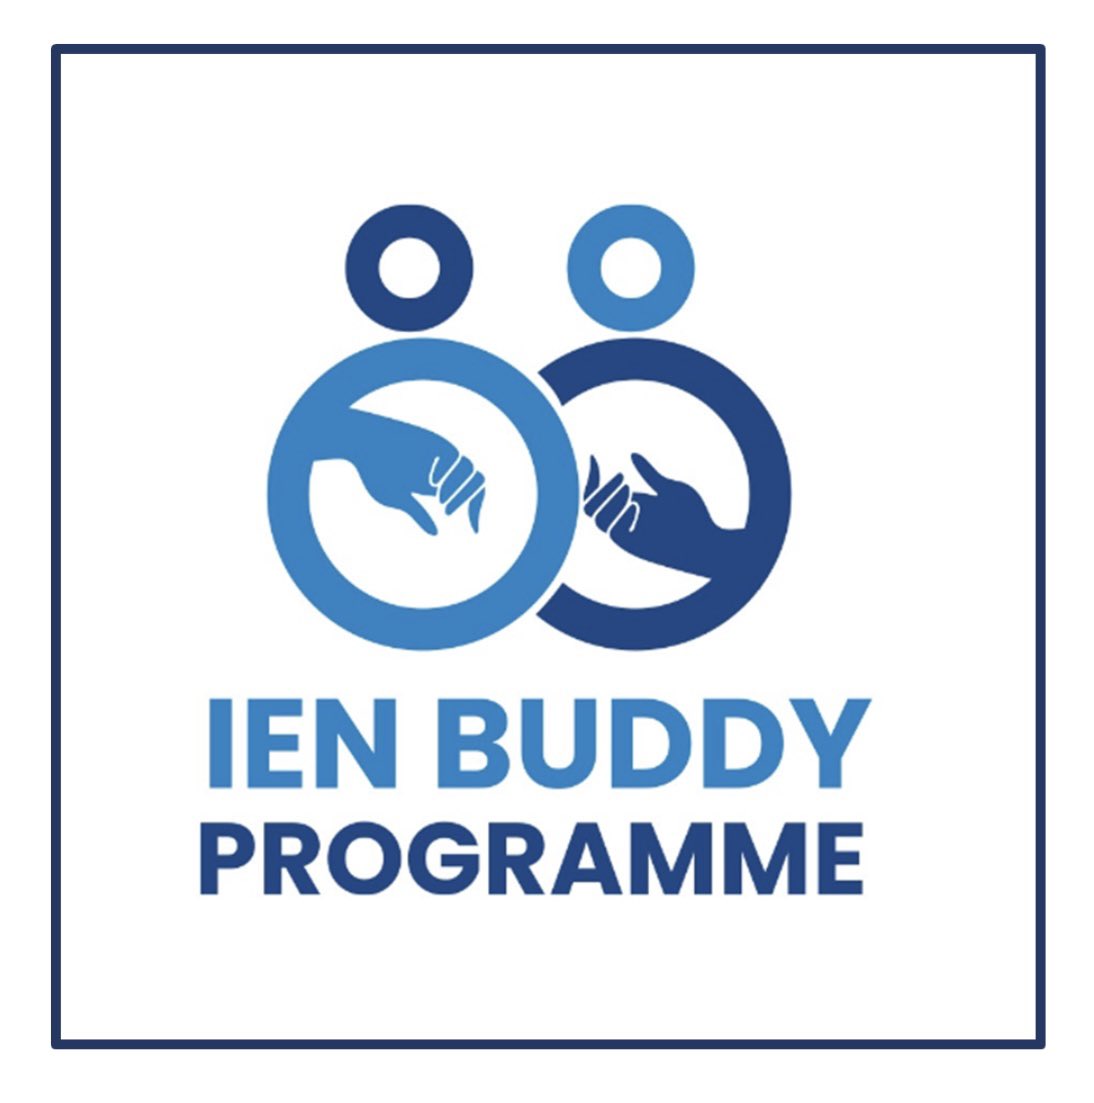 our IEN Buddy Logo, which stands for friendliness in the workplace. The programme offers an avenue where people can freely ask for assistance, pastoral support, and interaction. @ImperialPeople @IEN_Imperial @marlonph5 @emerdiegoRN @mfranmarie @FeBlair75 @Jan_Goldsmith35